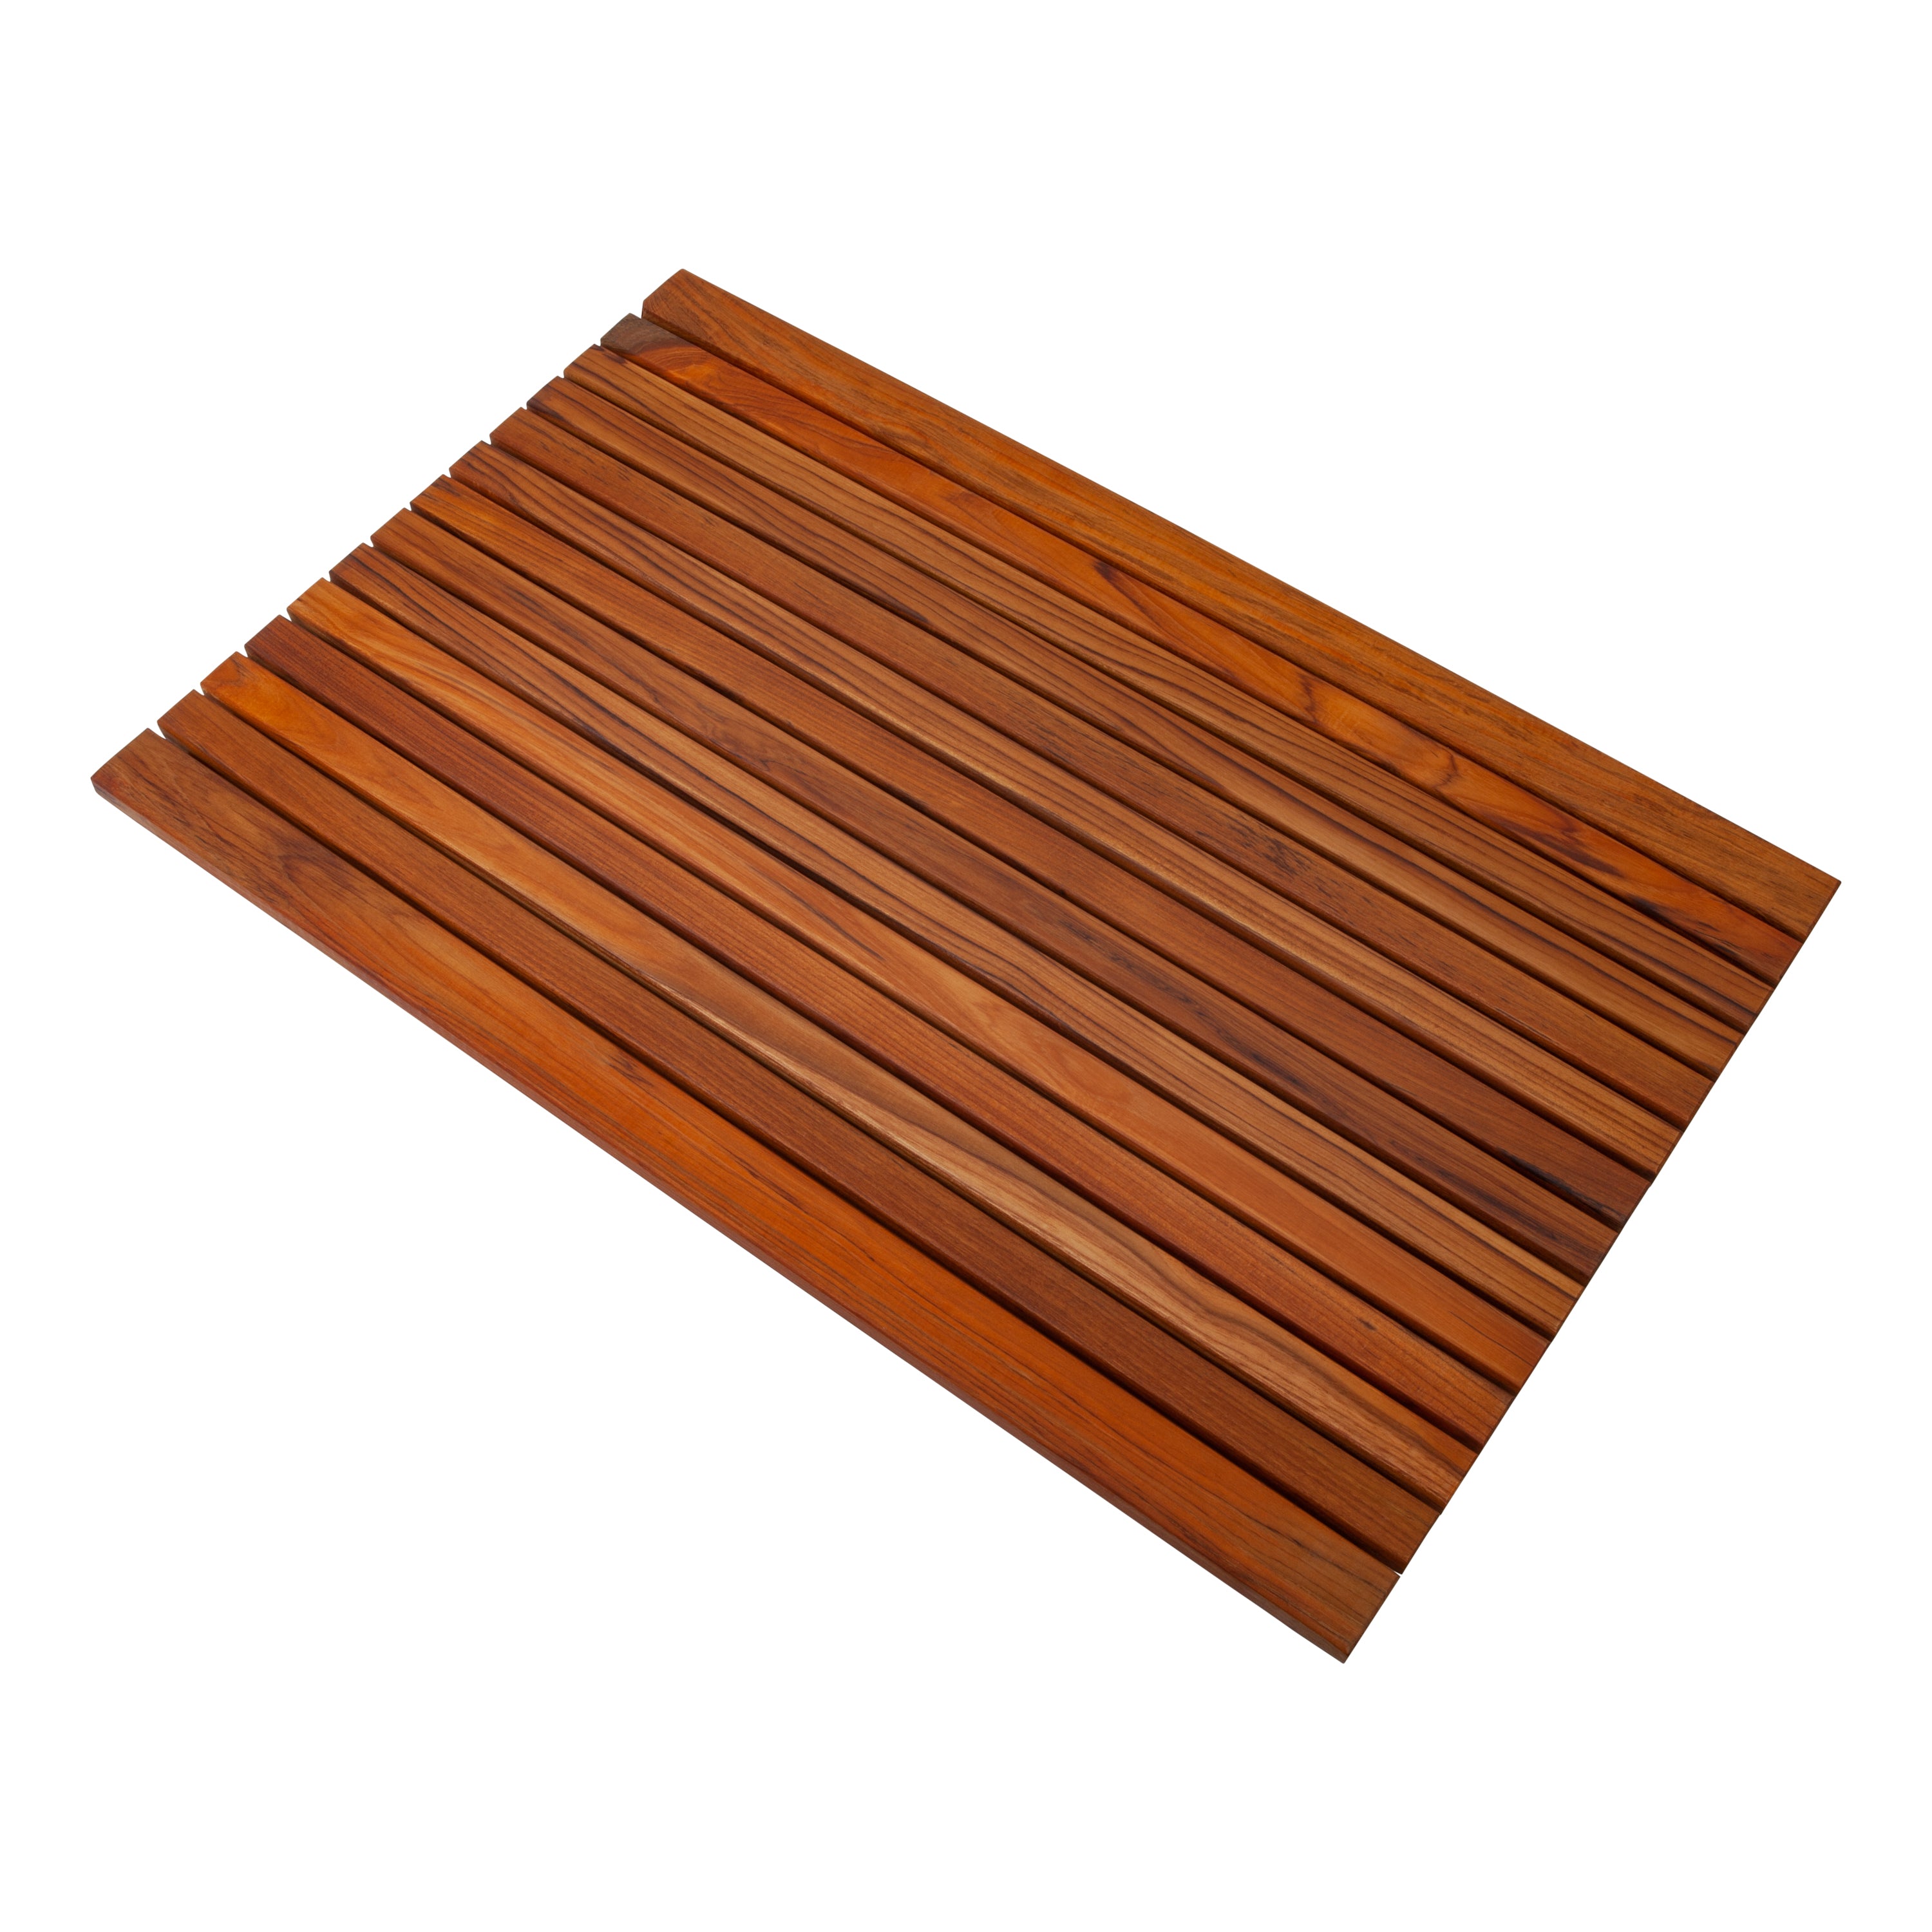 Durango Oiled Mat with Wide End Slat 31.4″ x 19.6″